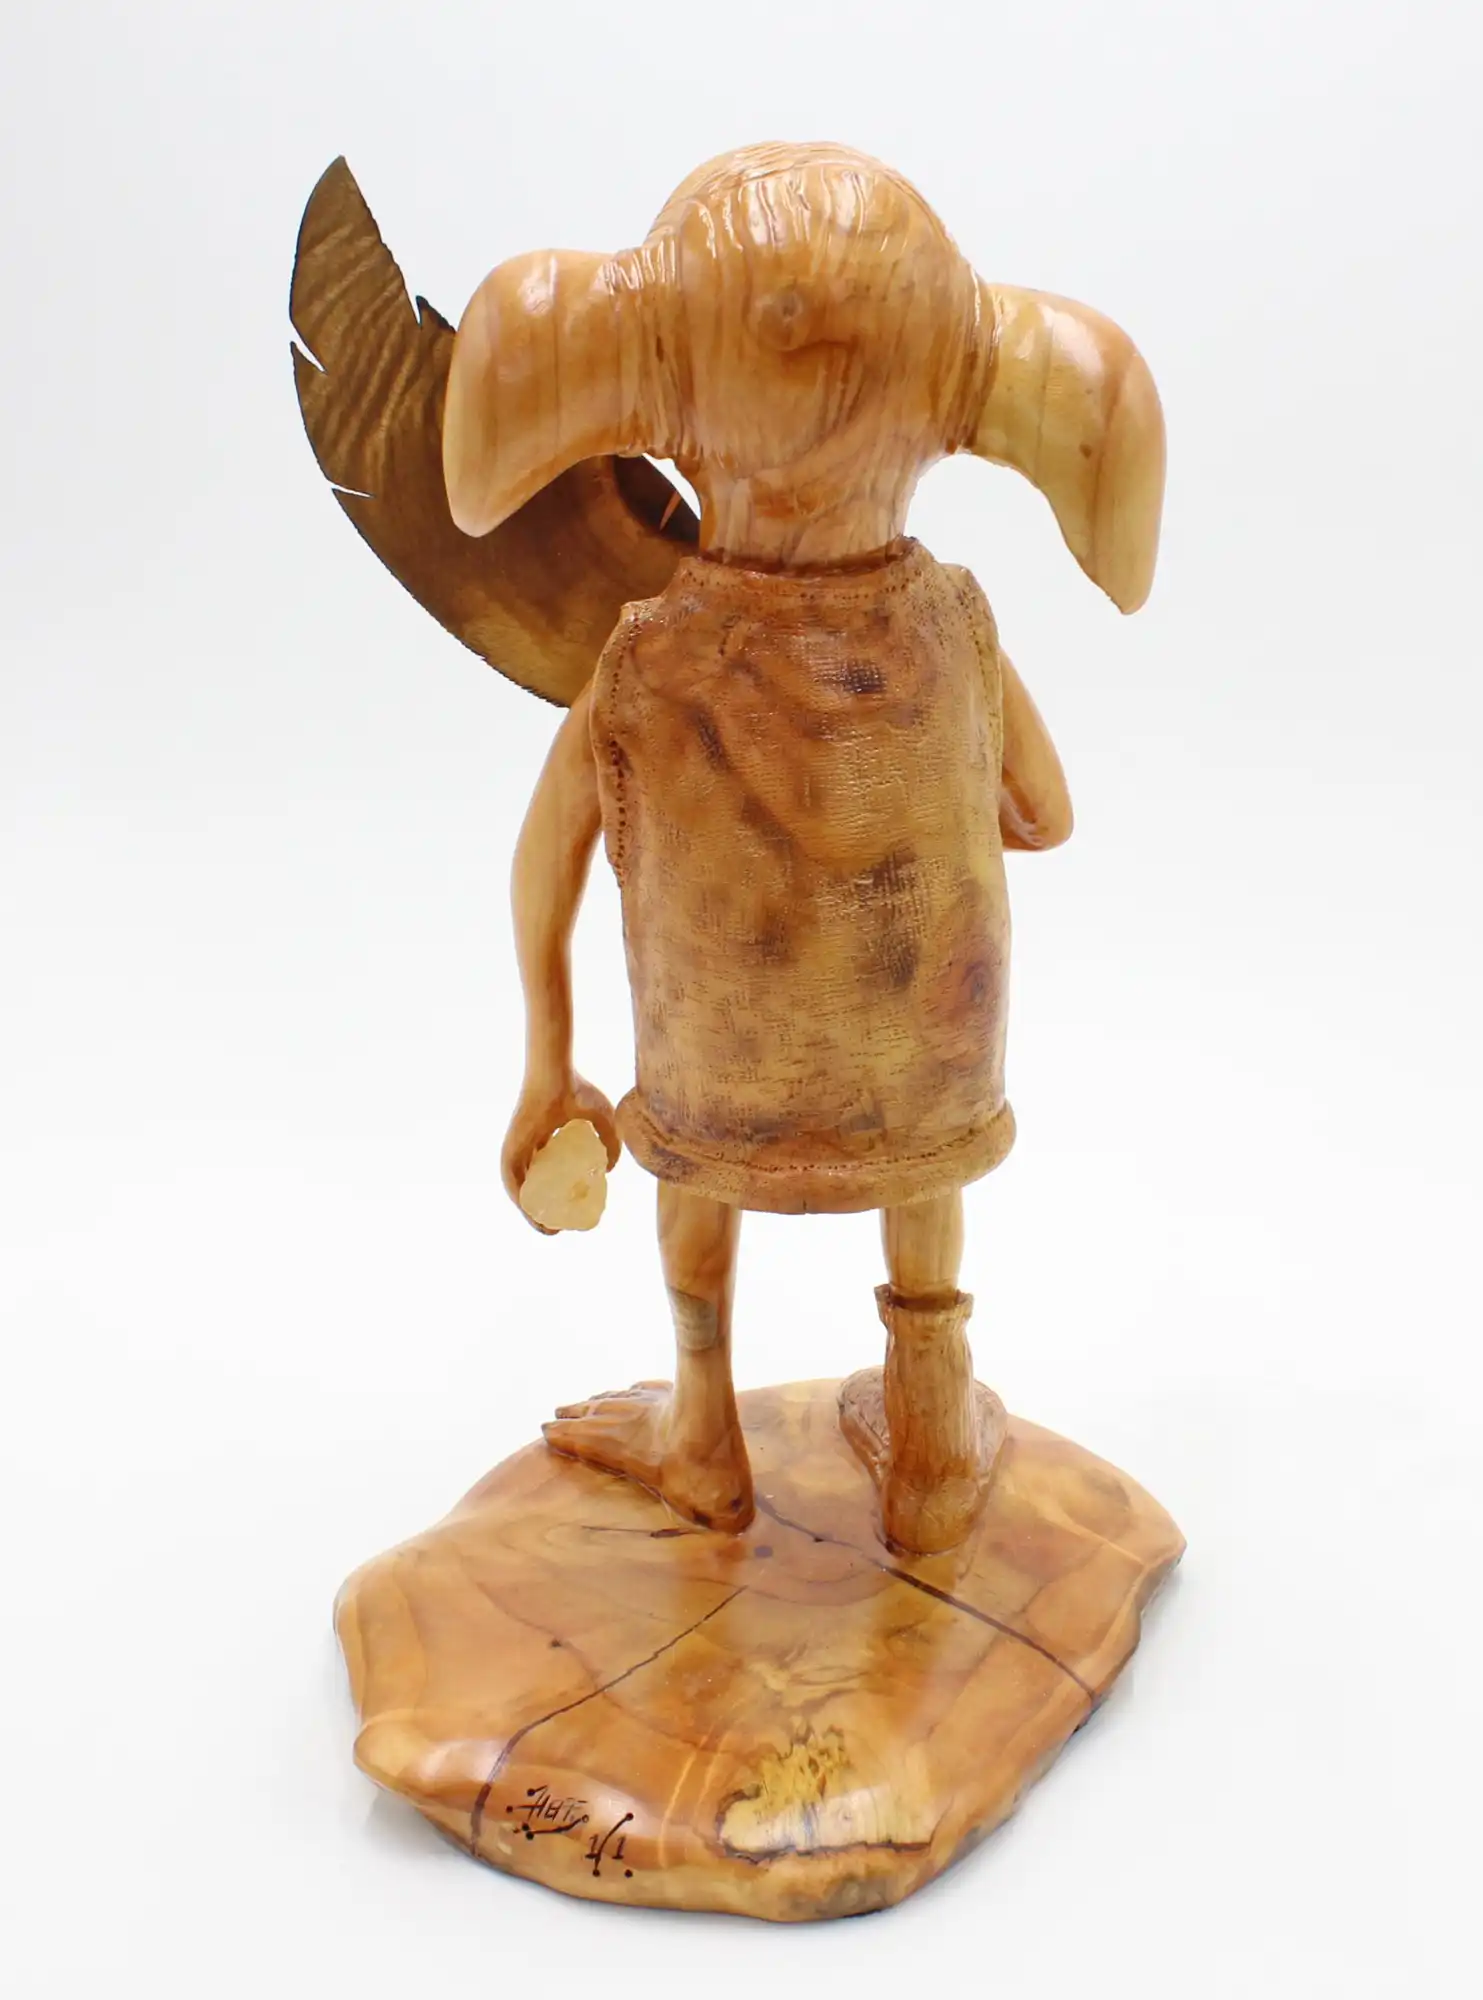 Dobby woodcarving sculpture